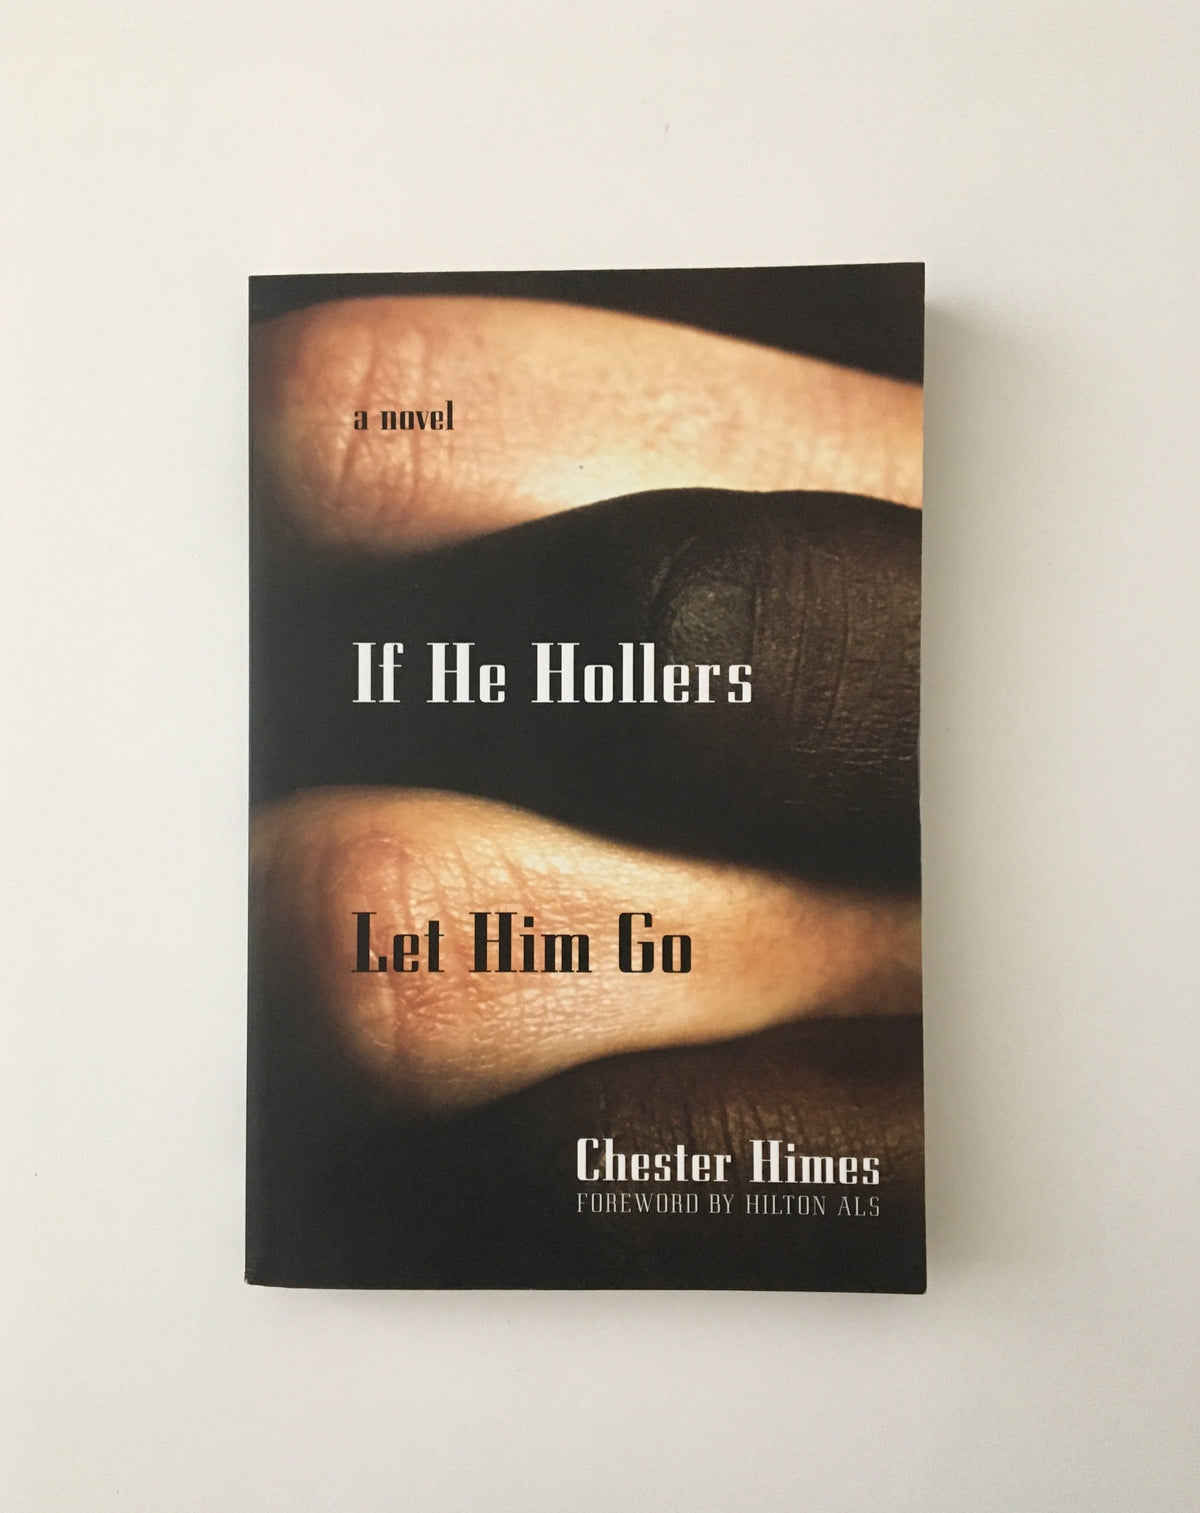 If He Hollers by Chester Himes, book, Ten Dollar Books, Ten Dollar Books